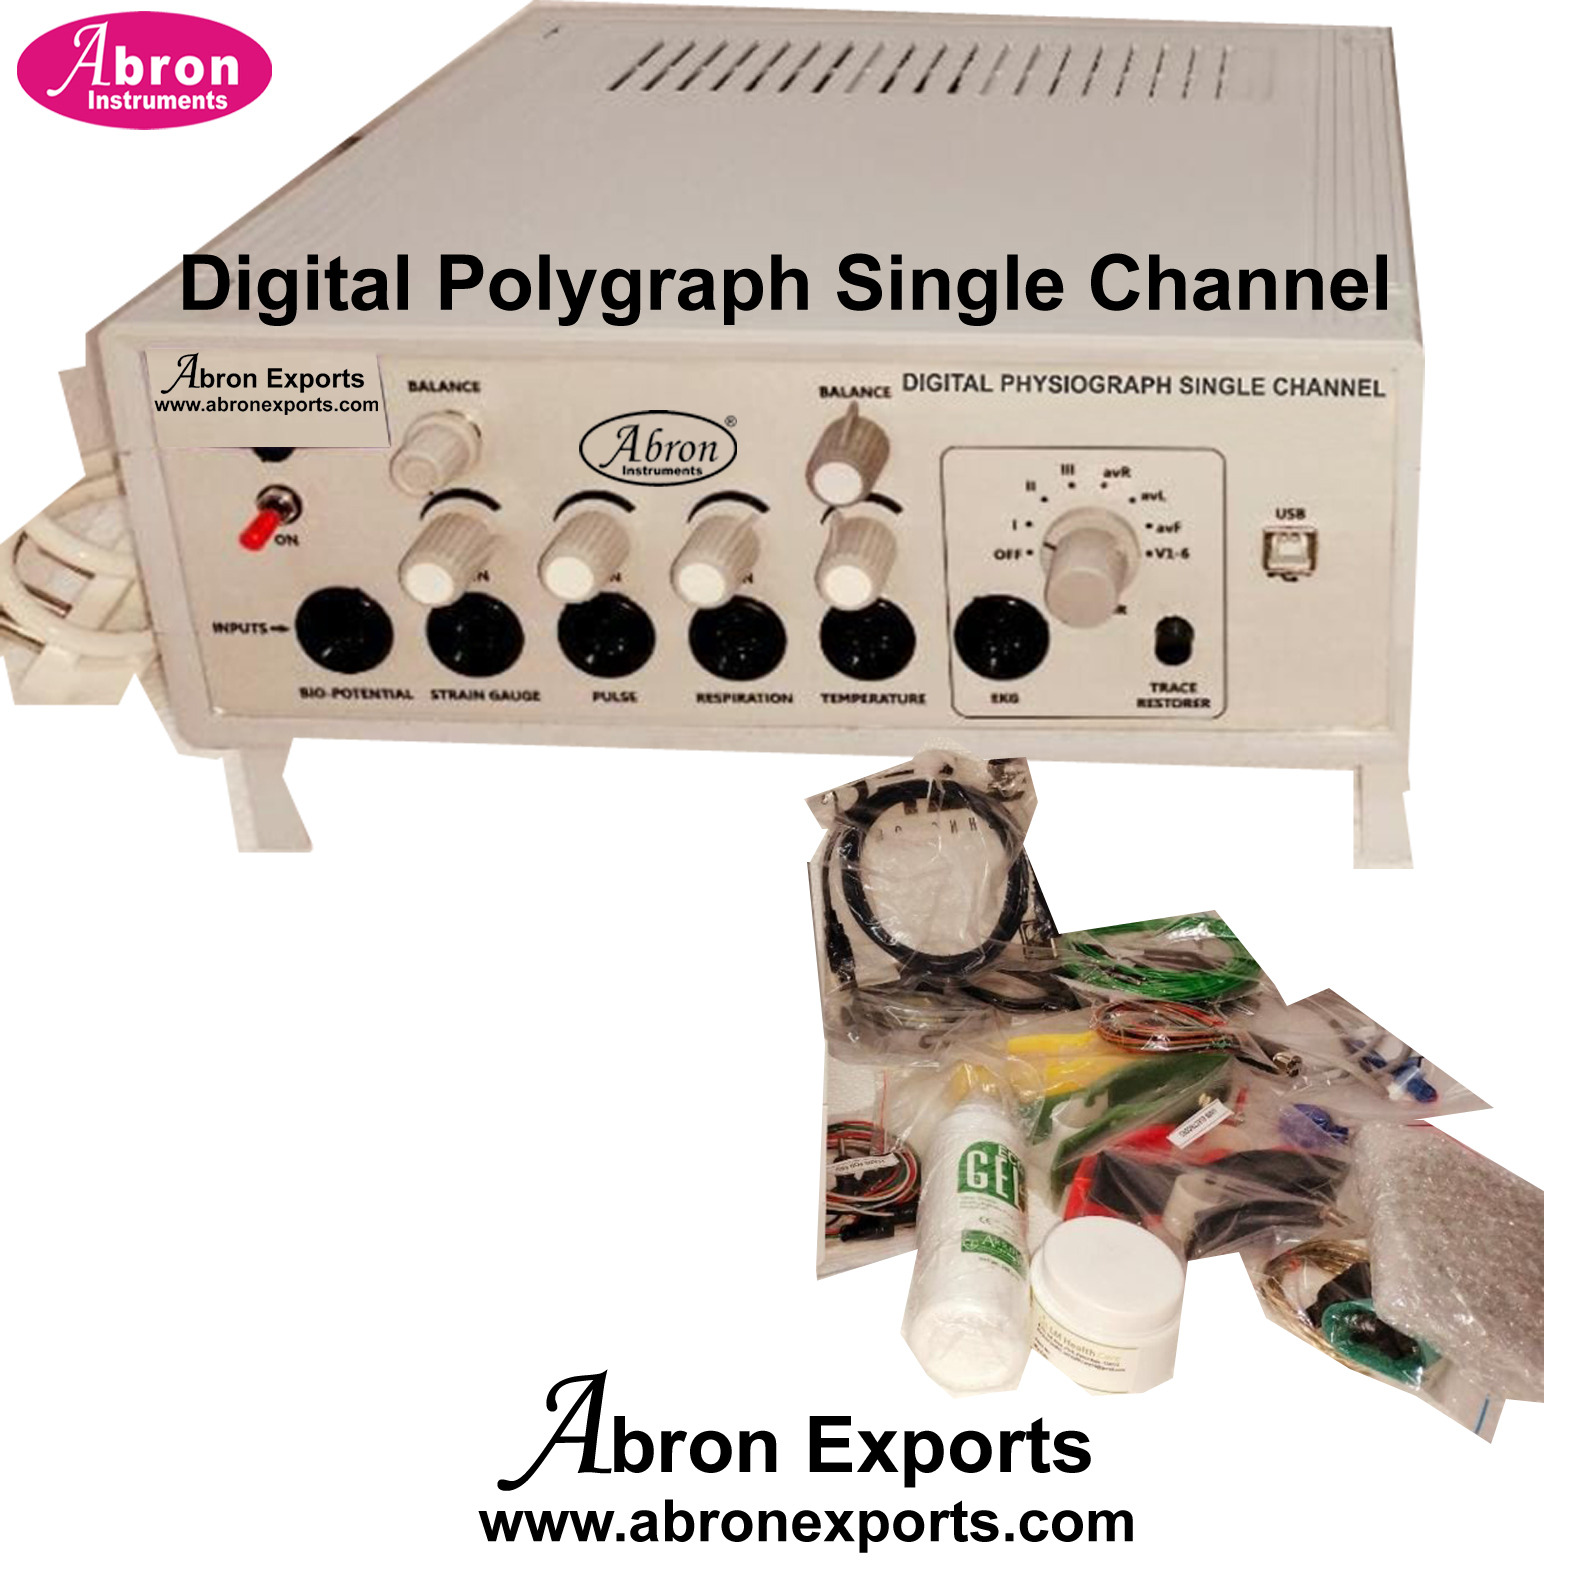 Polygraph Digital With 1 Channel With Software Truth Lie Detector Use Your Laptop Abron ABM-2501P1 